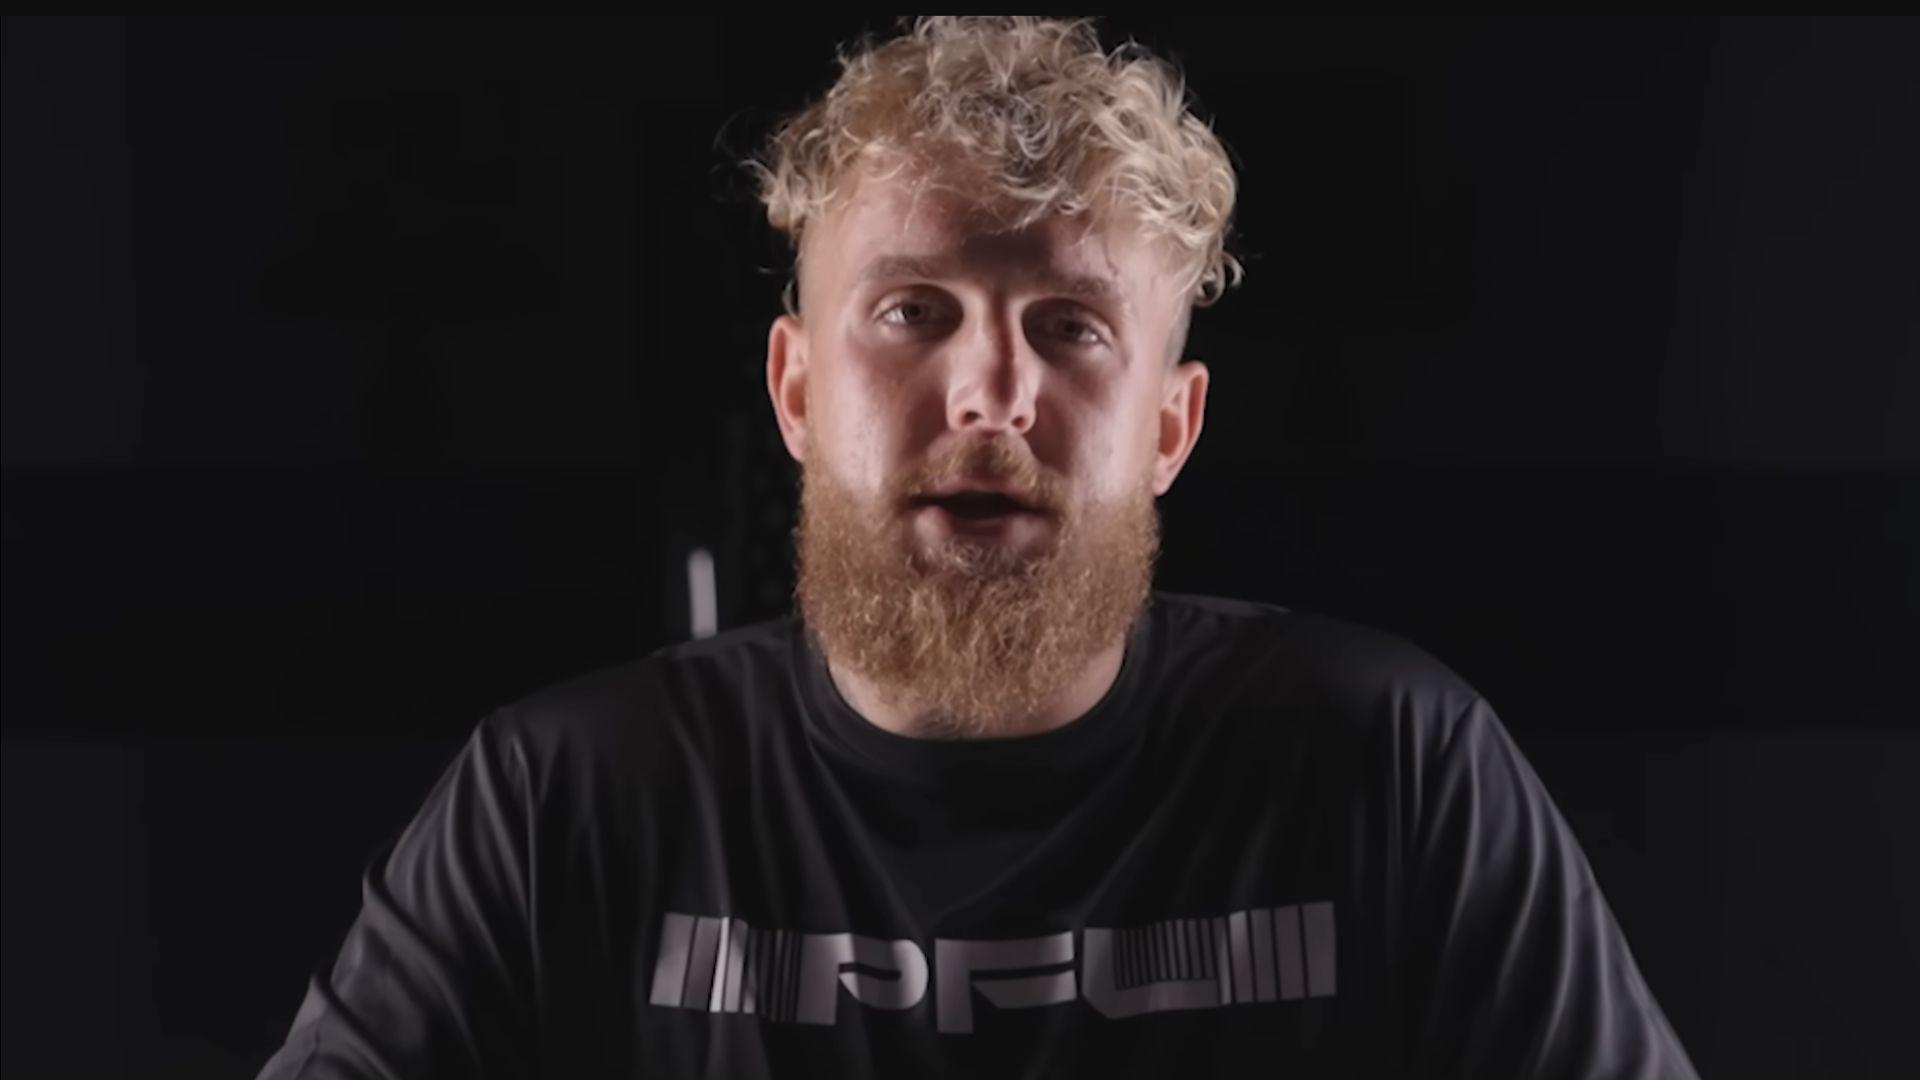 Jake Paul in black shirt with PFL on against black background